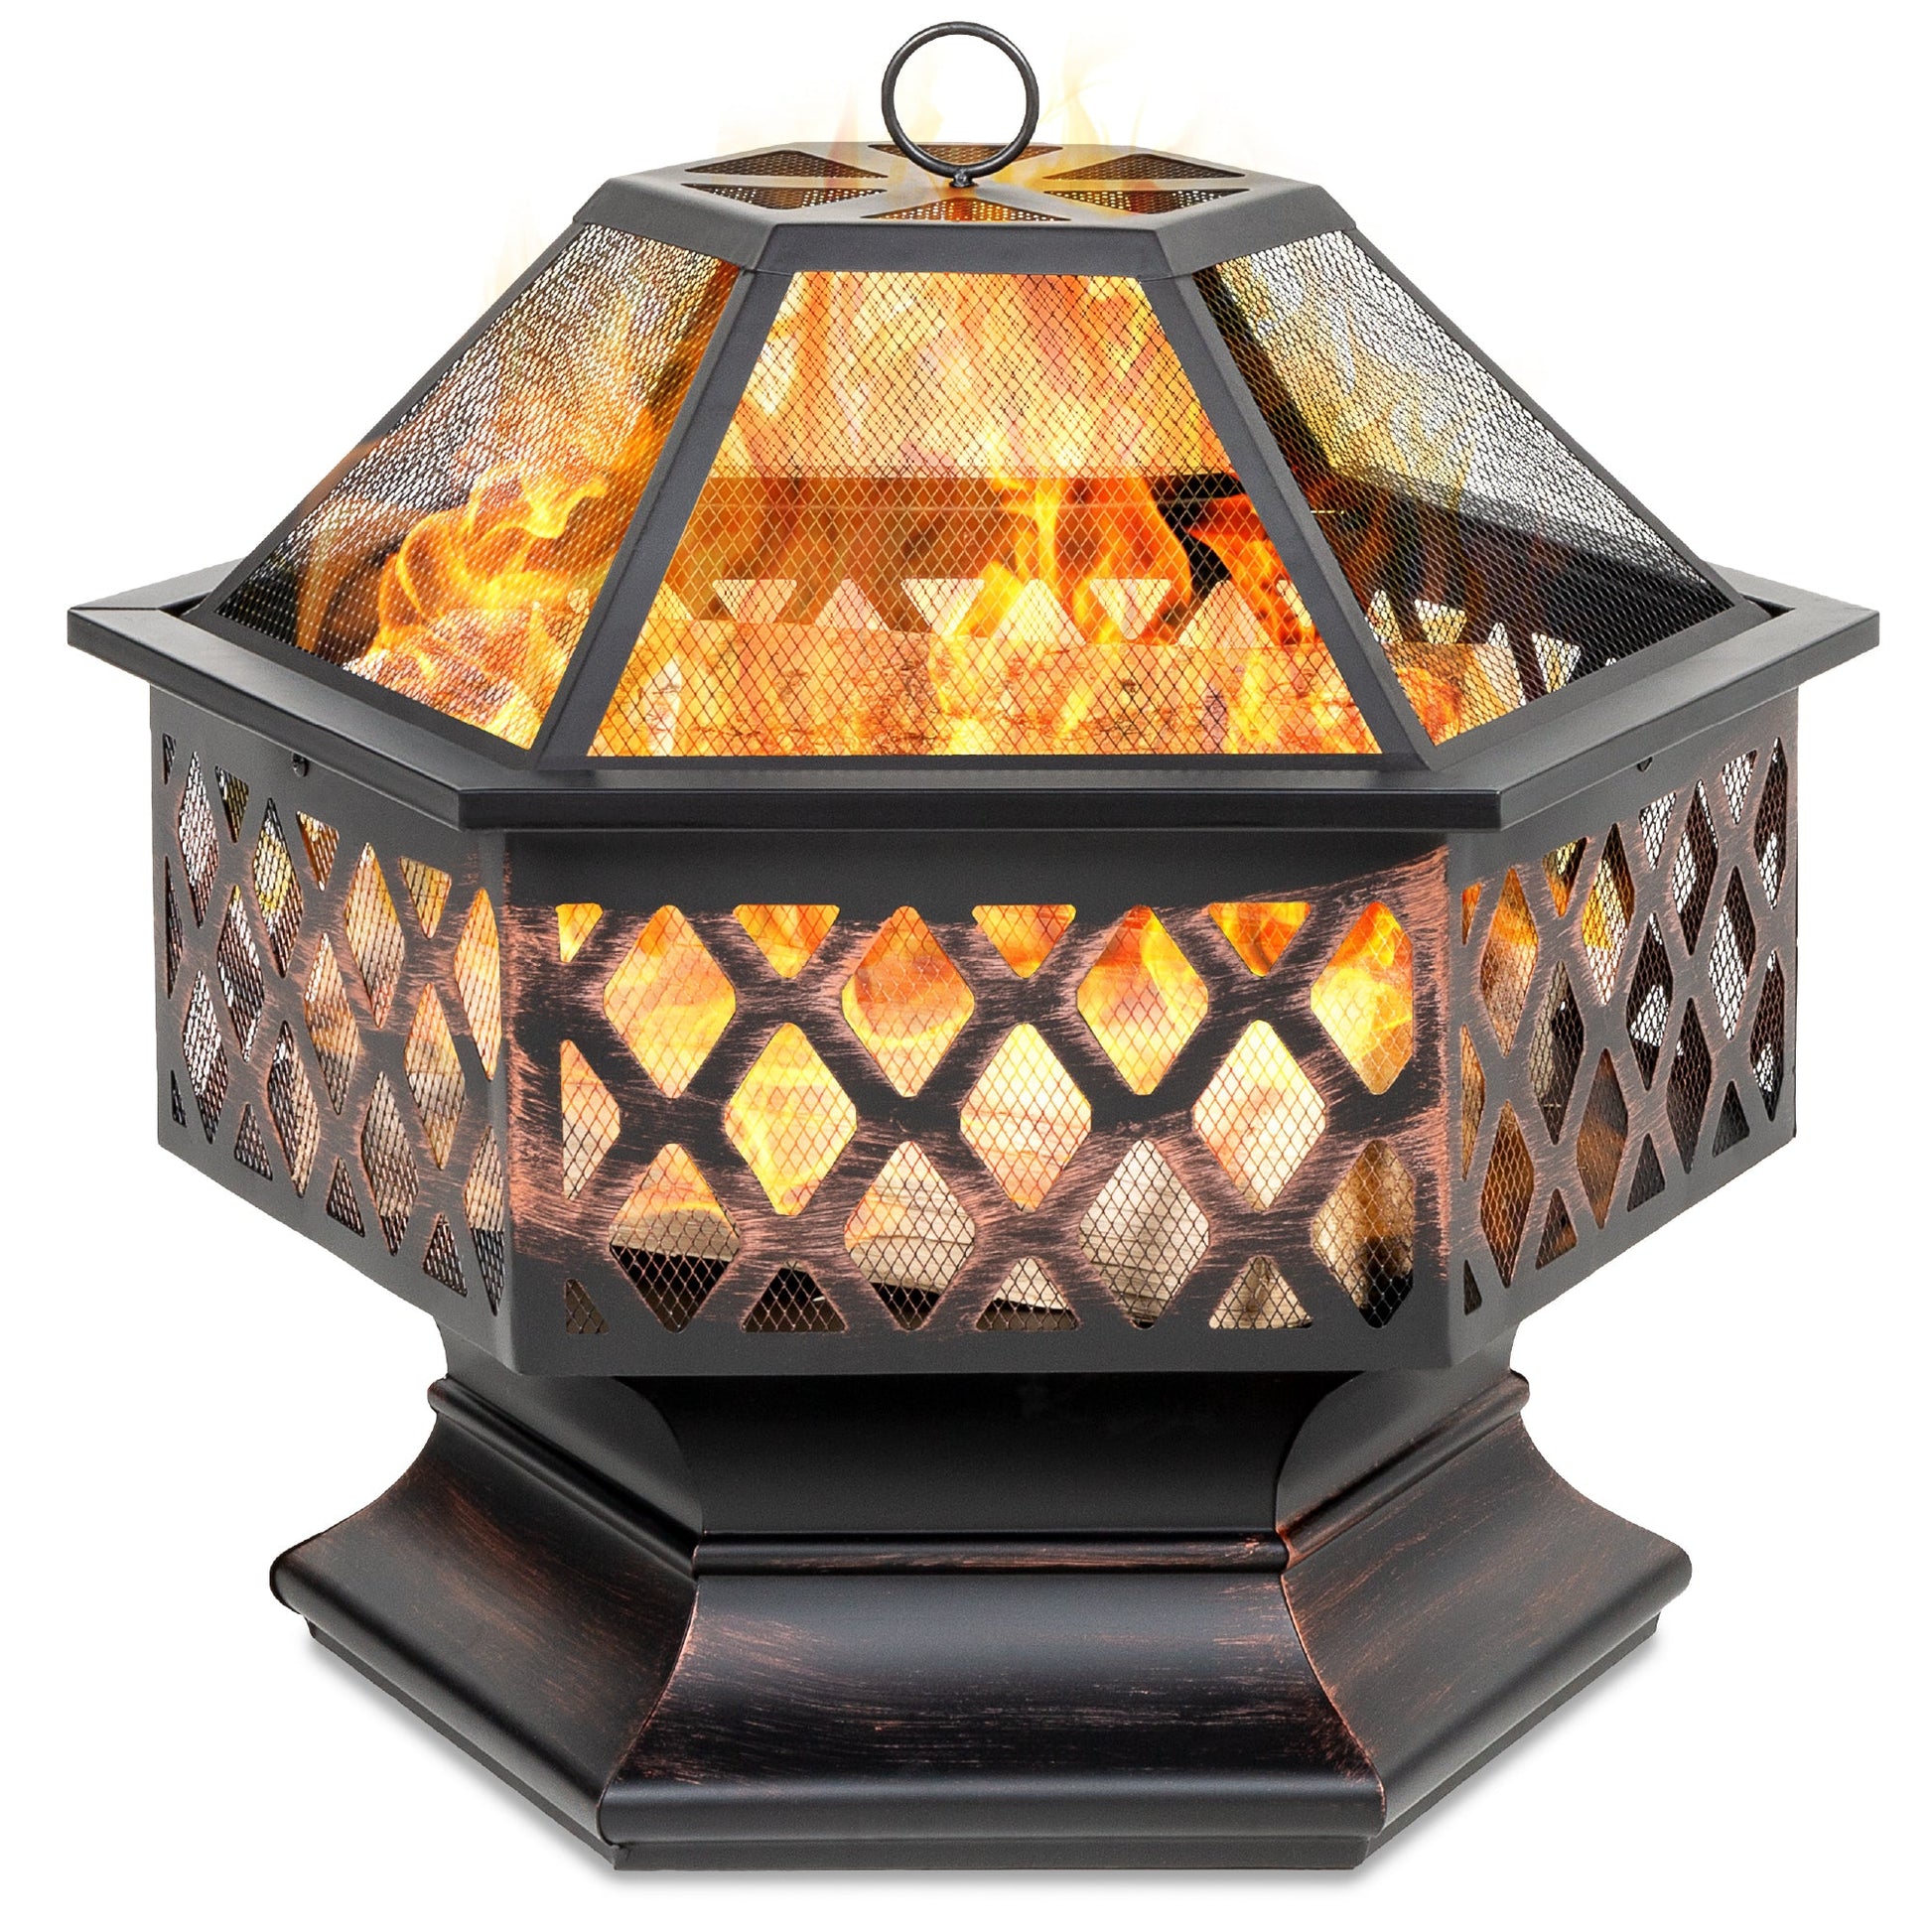 Hex-Shaped Outdoor Fire Pit w/ Flame-Retardant Lid - 24in